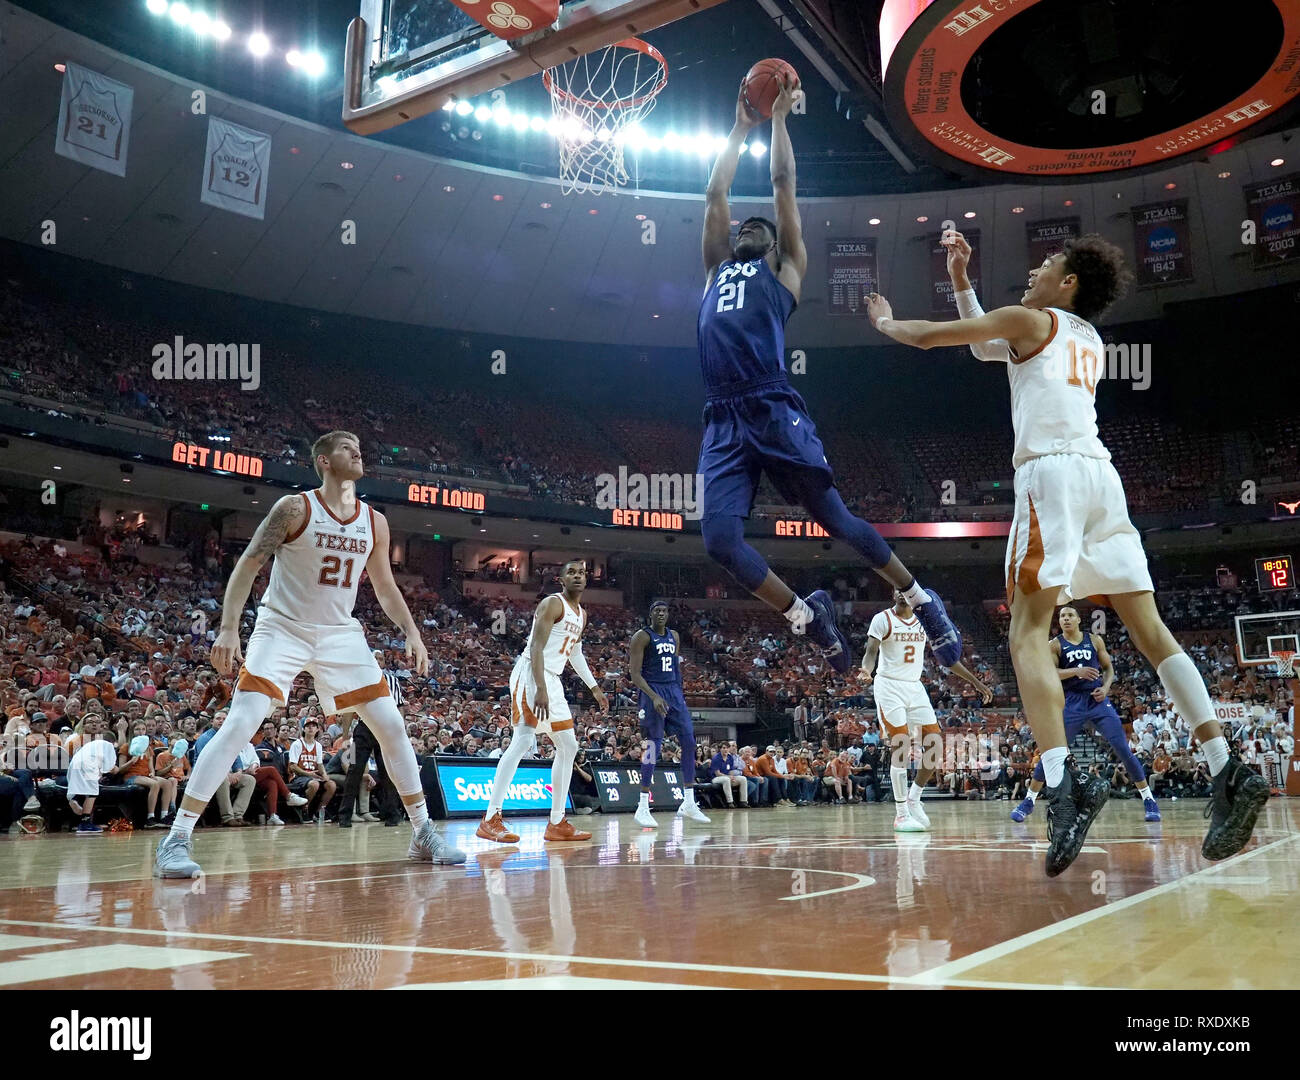 March 9, 2019. Kevin Samuel #21 of the TCU Horned Frogs in action vs the Texas Longhorns at the Frank Erwin Center in Austin Texas. TCU beats Texas 69-54.Robert Backman/Cal Sport Media. Stock Photo